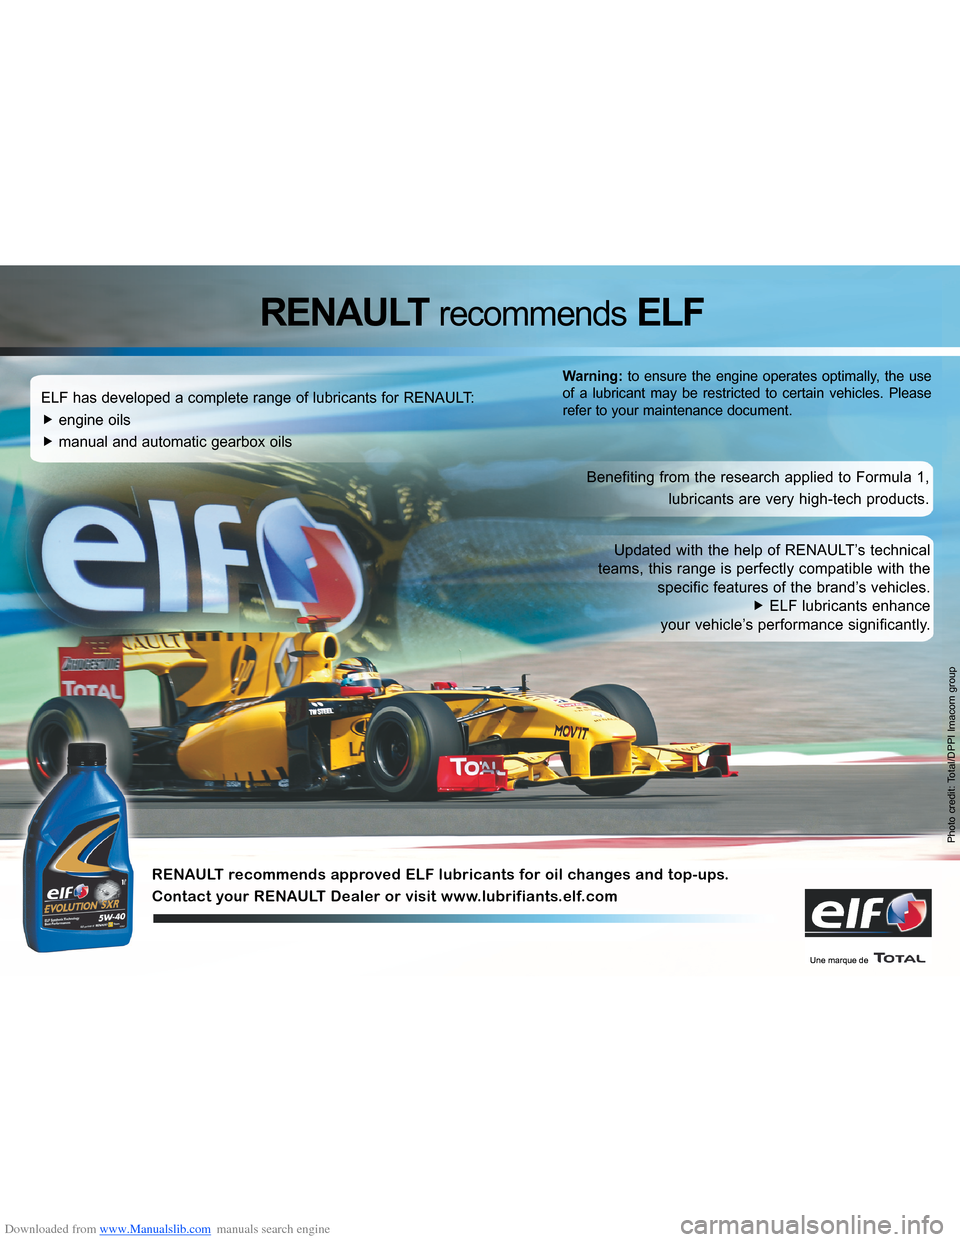 RENAULT CLIO 2012 X85 / 3.G Owners Manual Downloaded from www.Manualslib.com manuals search engine 
Photo credit: Total/DPPI Imacom group
ELF has developed a complete range of lubricants for RENAULT:
�f engine oils
�f manual and automatic gea